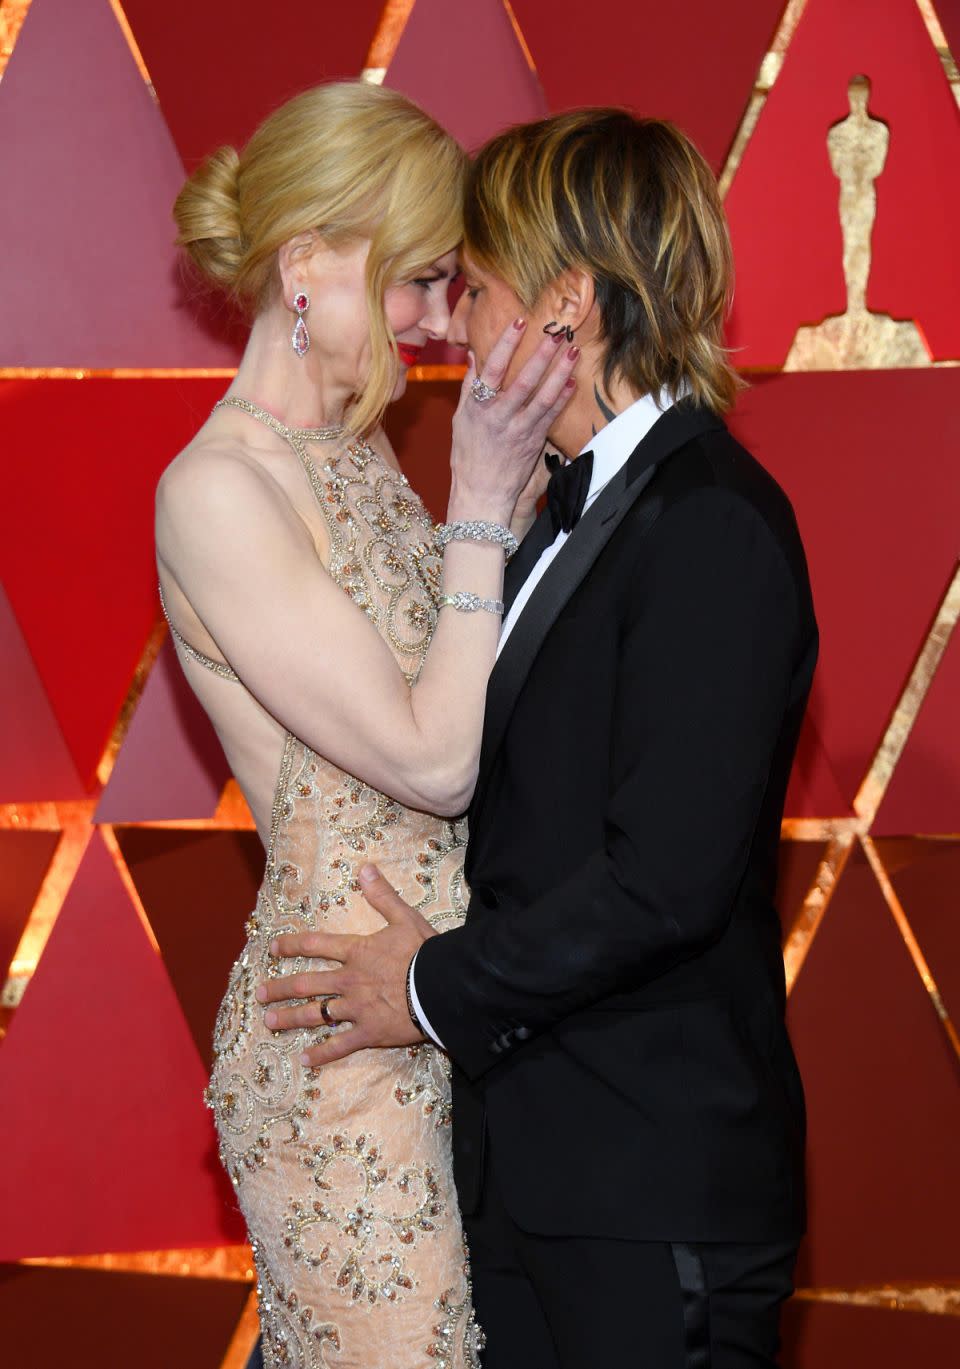 The couple looked very loved-up at the Academy Awards back in February. Source: Getty